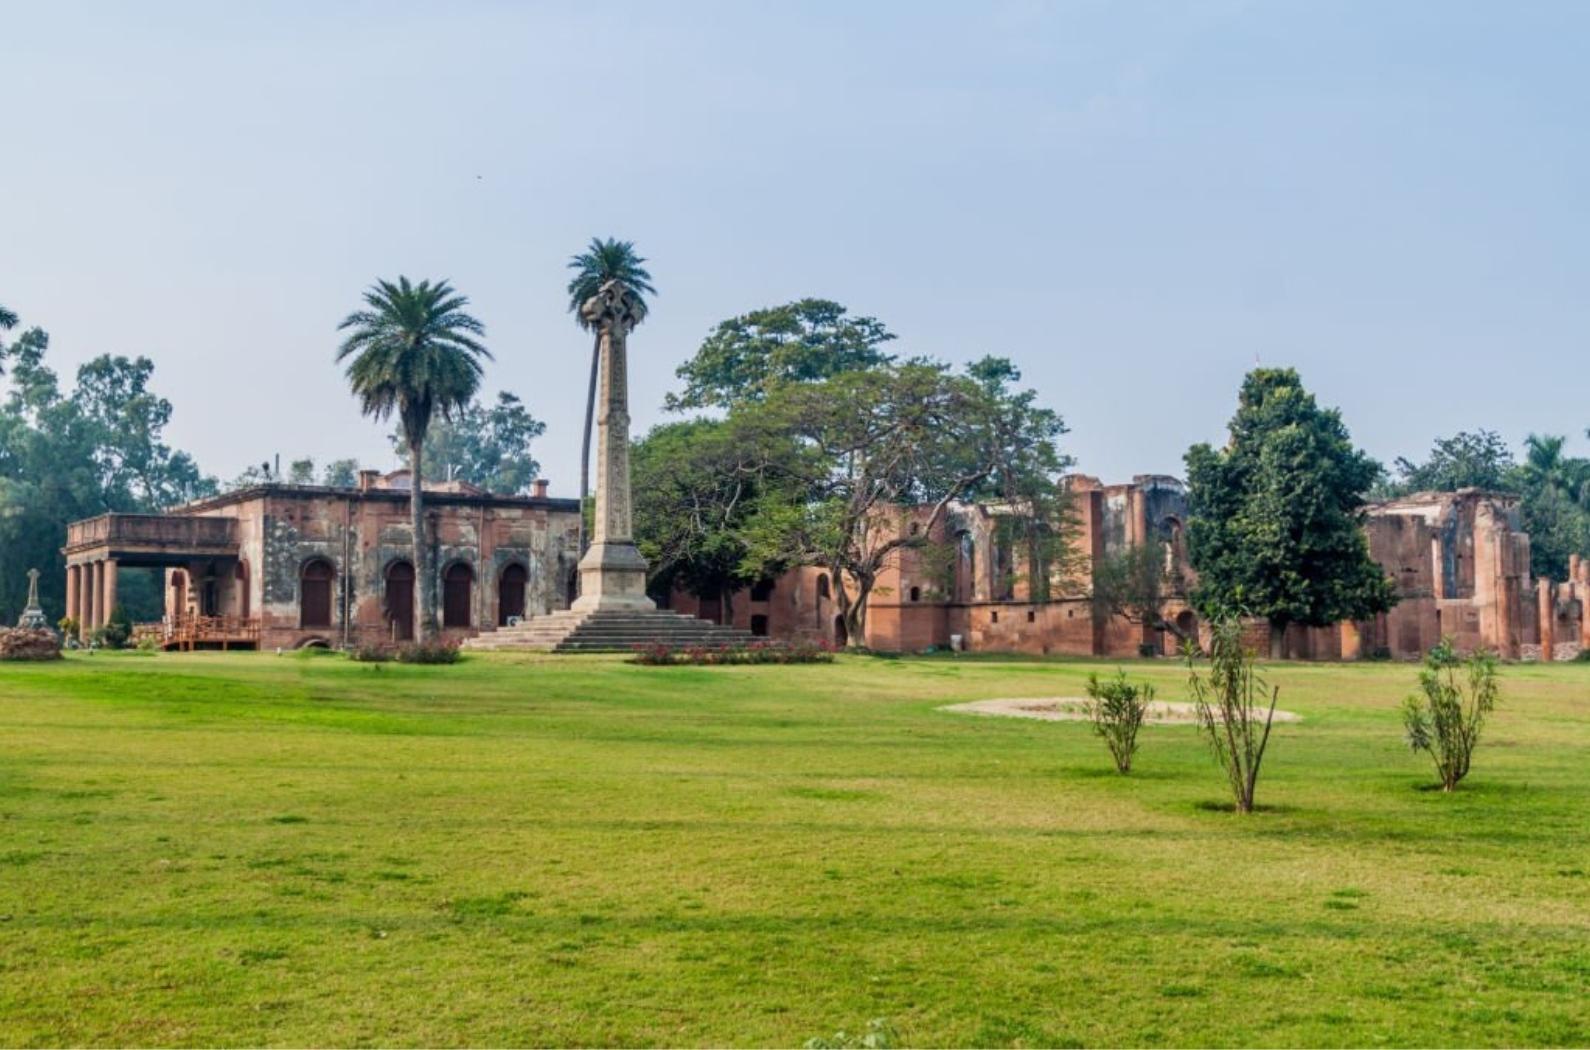 Ruins of the Residency Complex in Lucknow.